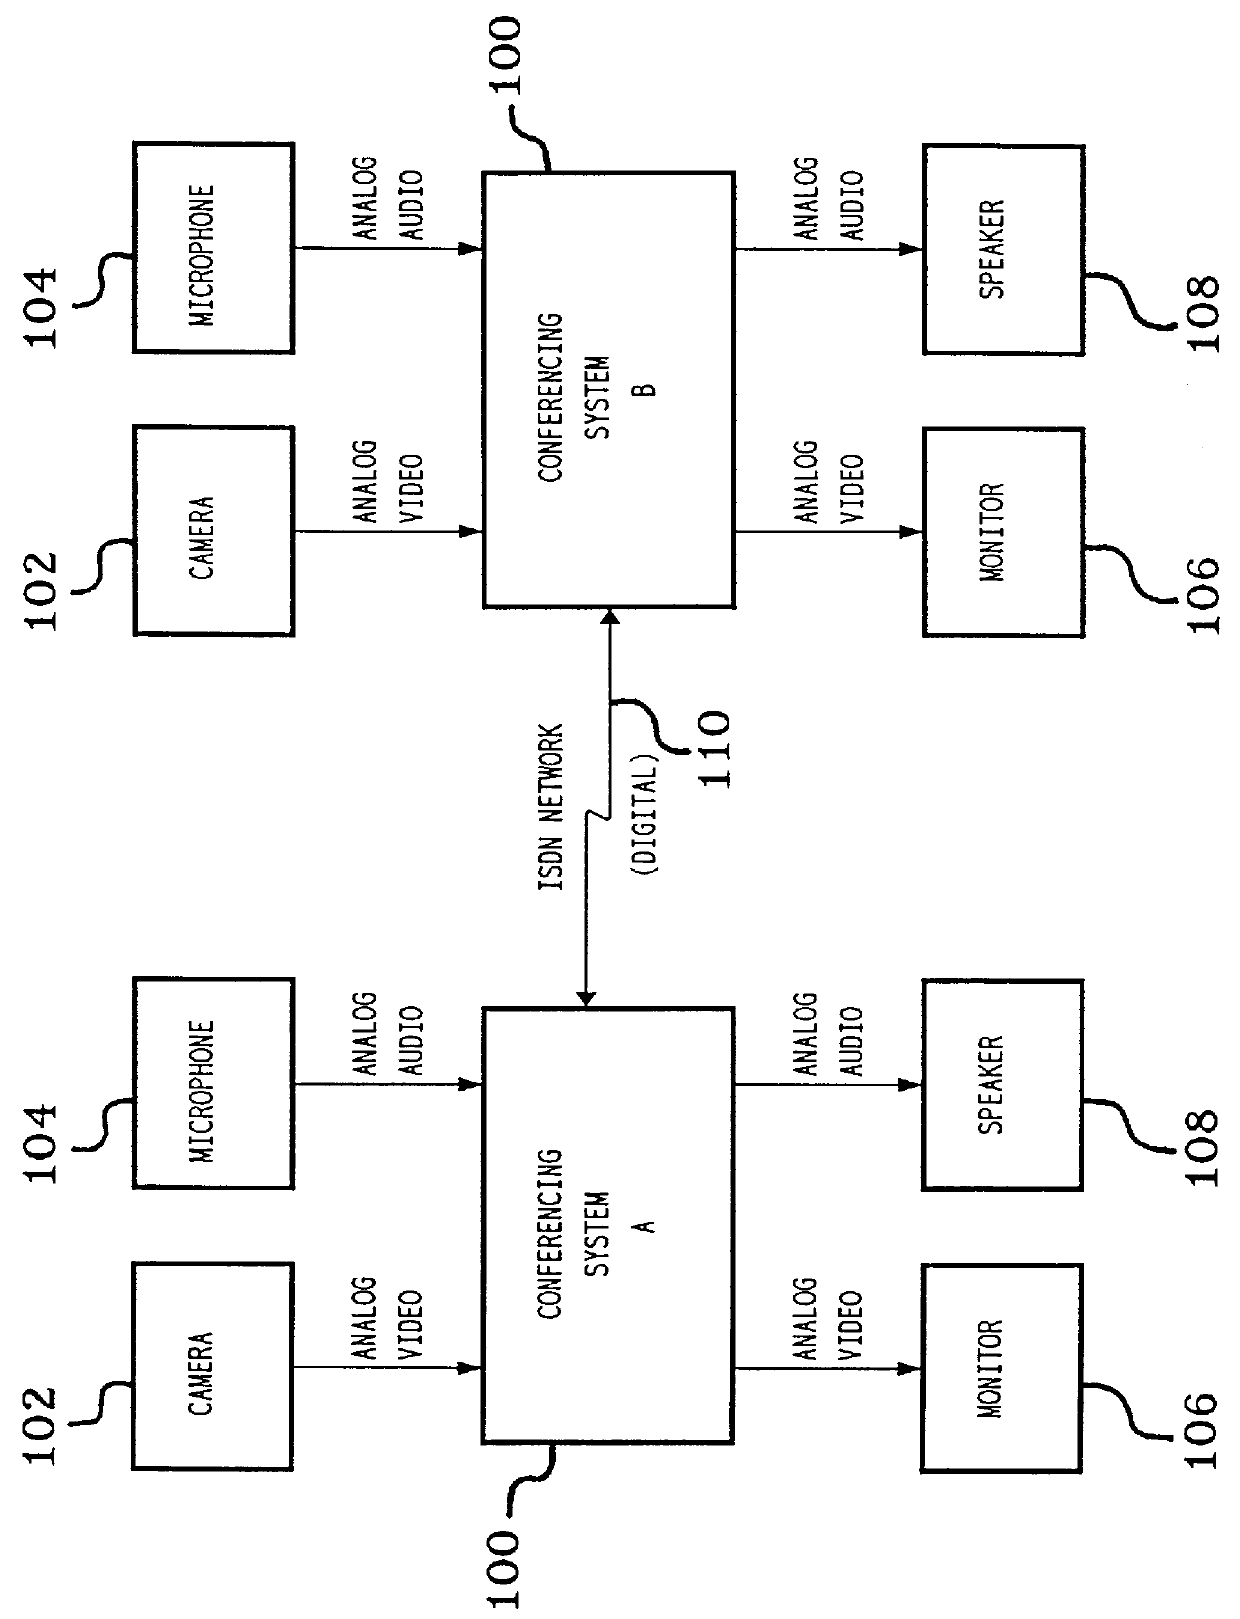 Communications subsystem for computer-based conferencing system using both ISDN B channels for transmission